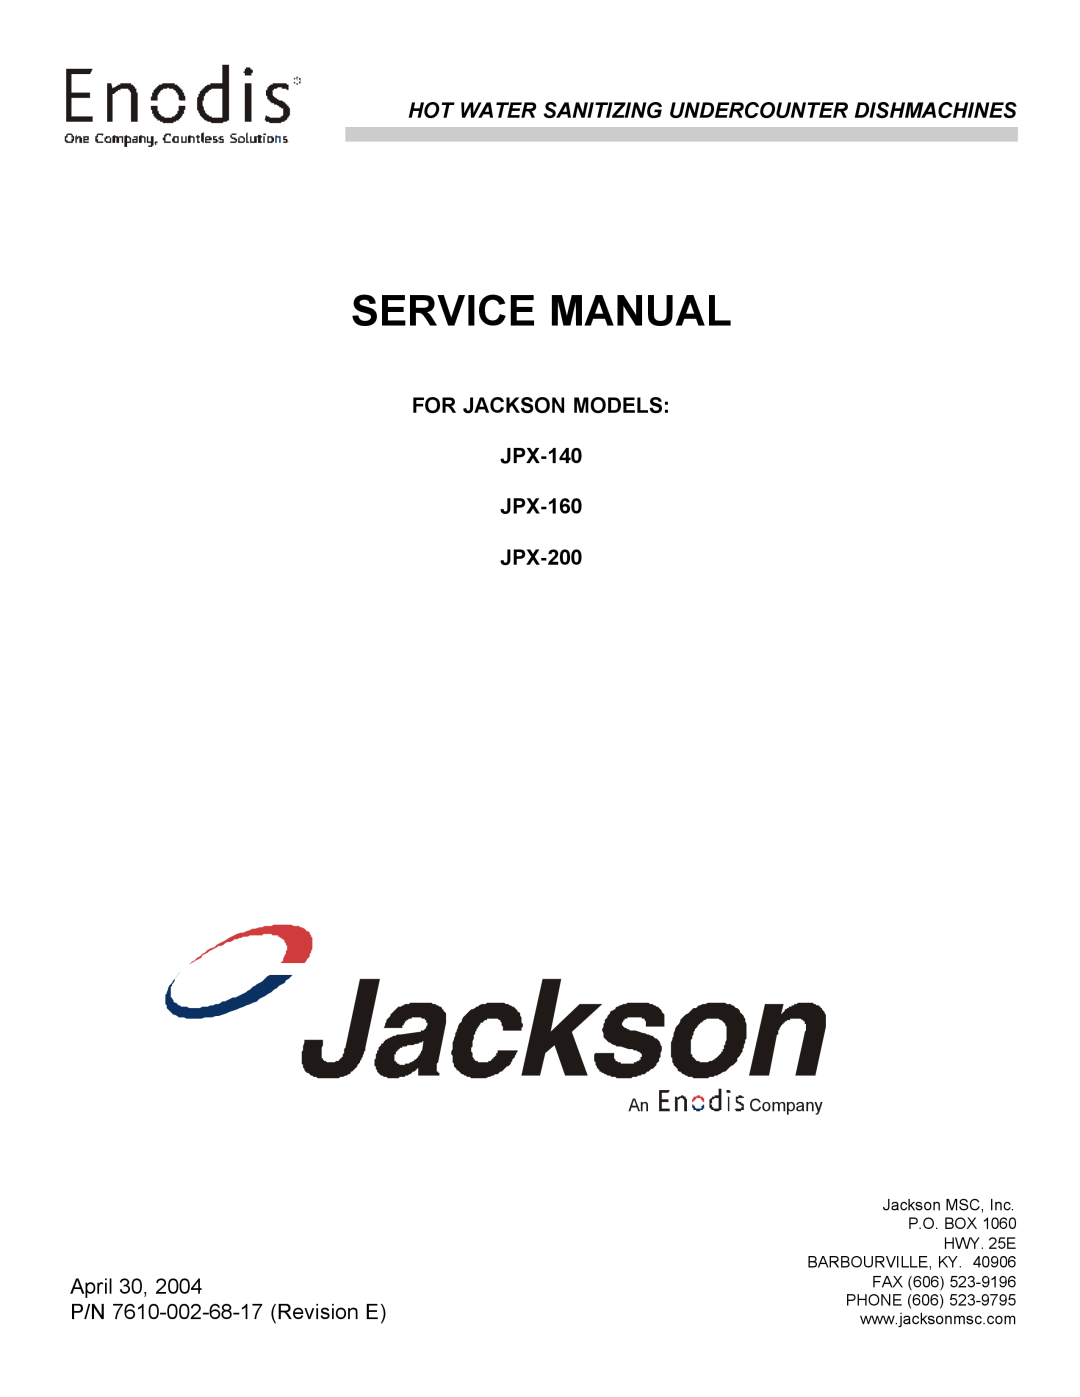 Jackson JPX-160 service manual April 30 P/N 7610-002-68-17 Revision E, Hot Water Sanitizing Undercounter Dishmachines 